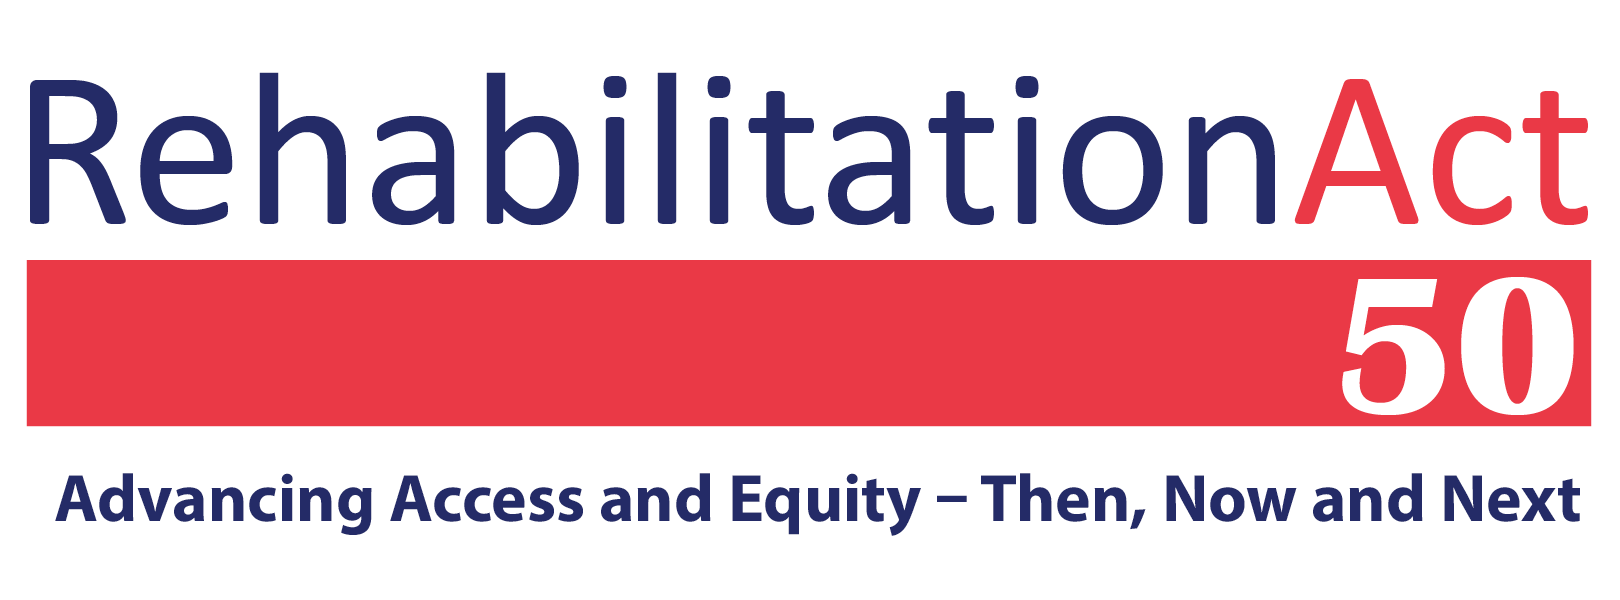 Rehabilitation Act 50 logo with theme "Advancing Access and Equity - Then, Now and Next"